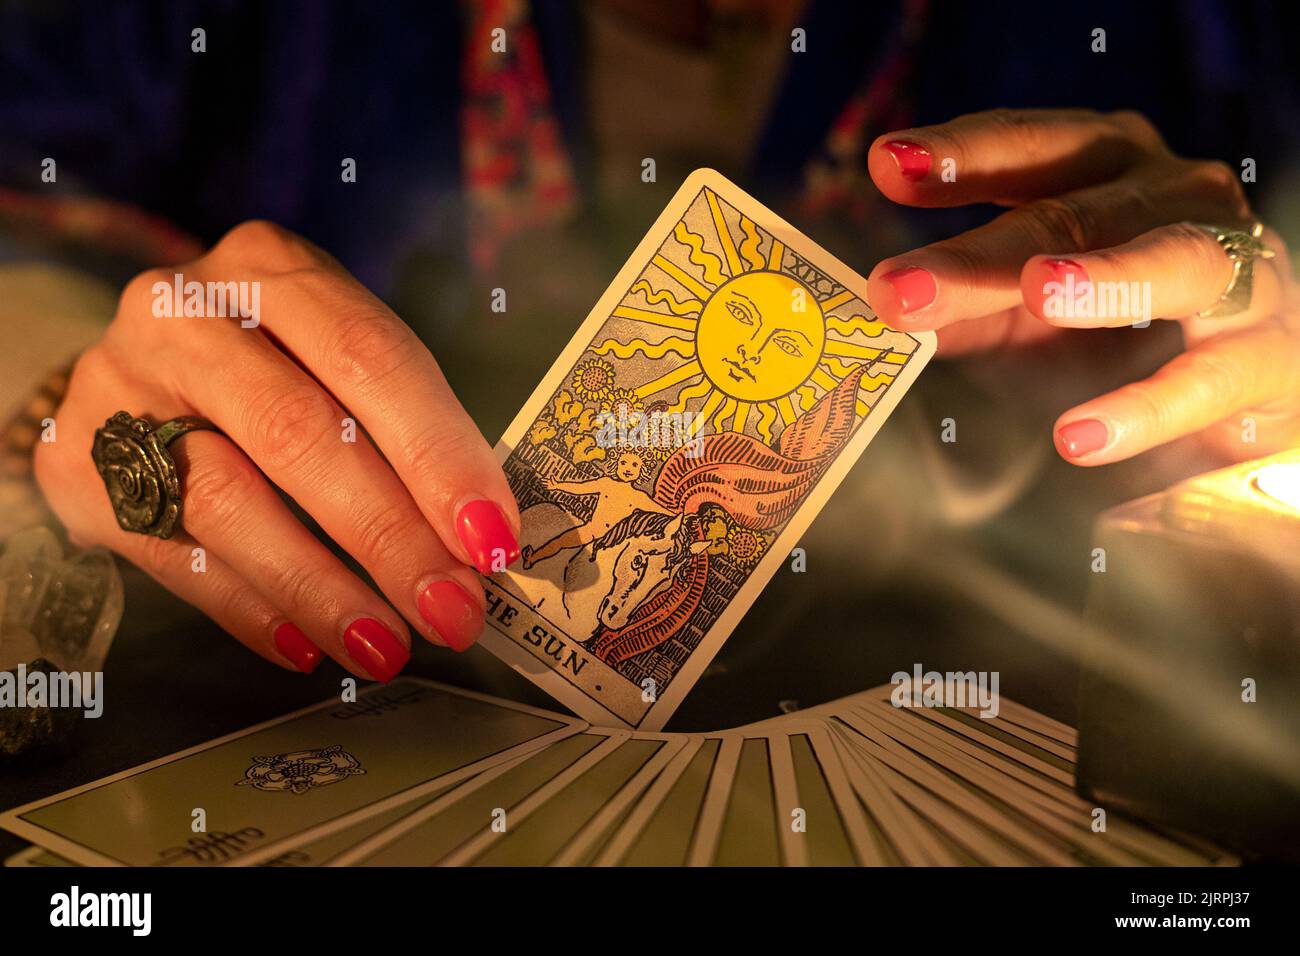 Fortune teller female hands showing The Sun tarot card, symbol of positivity and optimism, during a reading. Close-up with candle light and smoke, moo Stock Photo